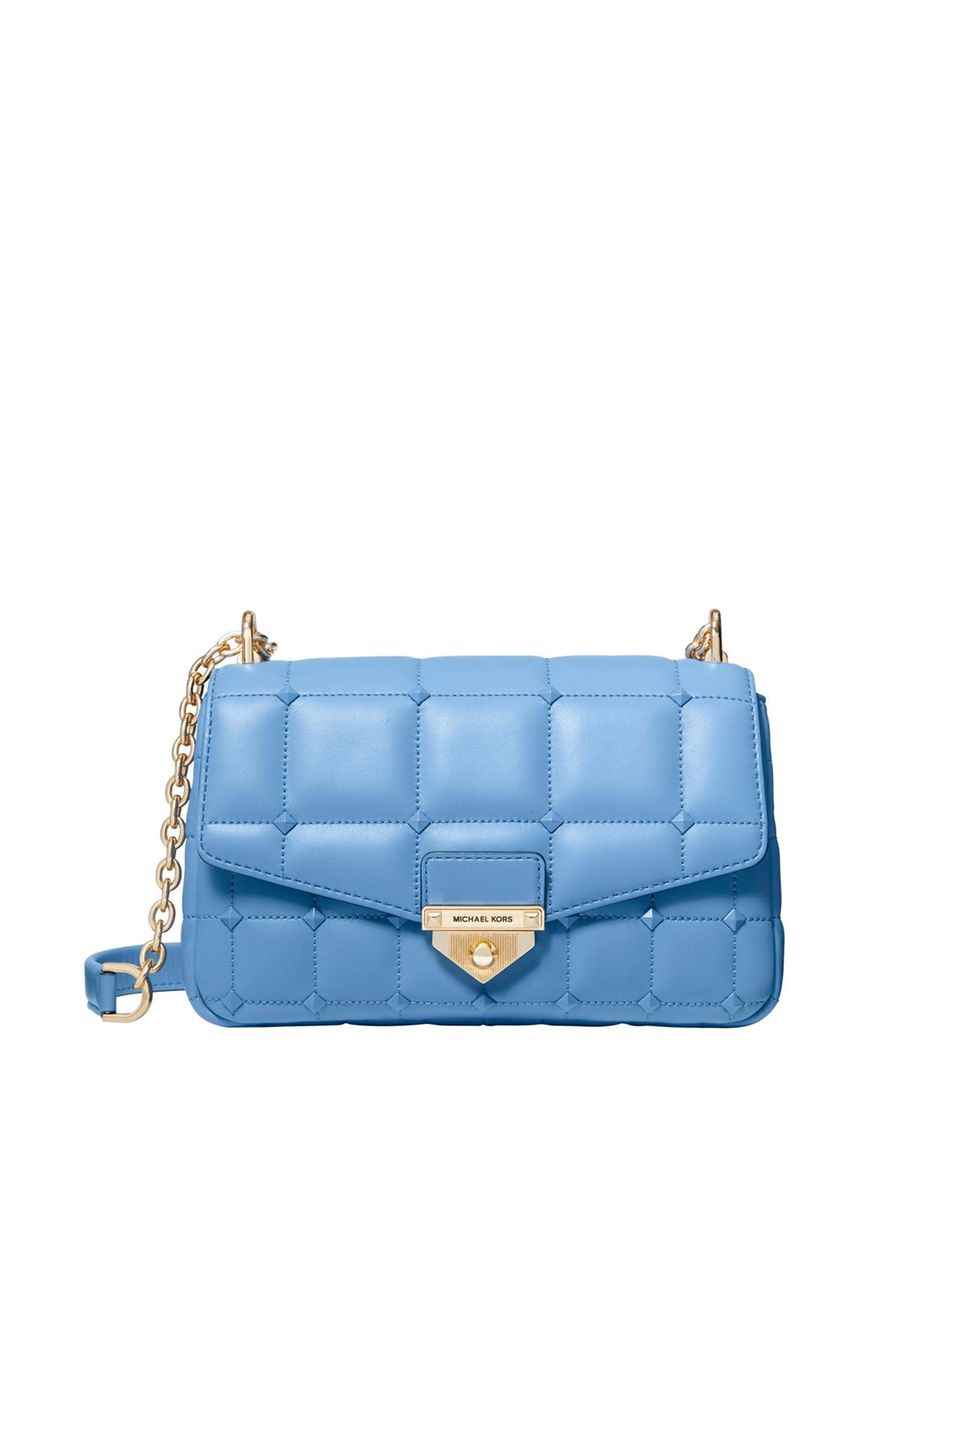 Find your own style: blue bag